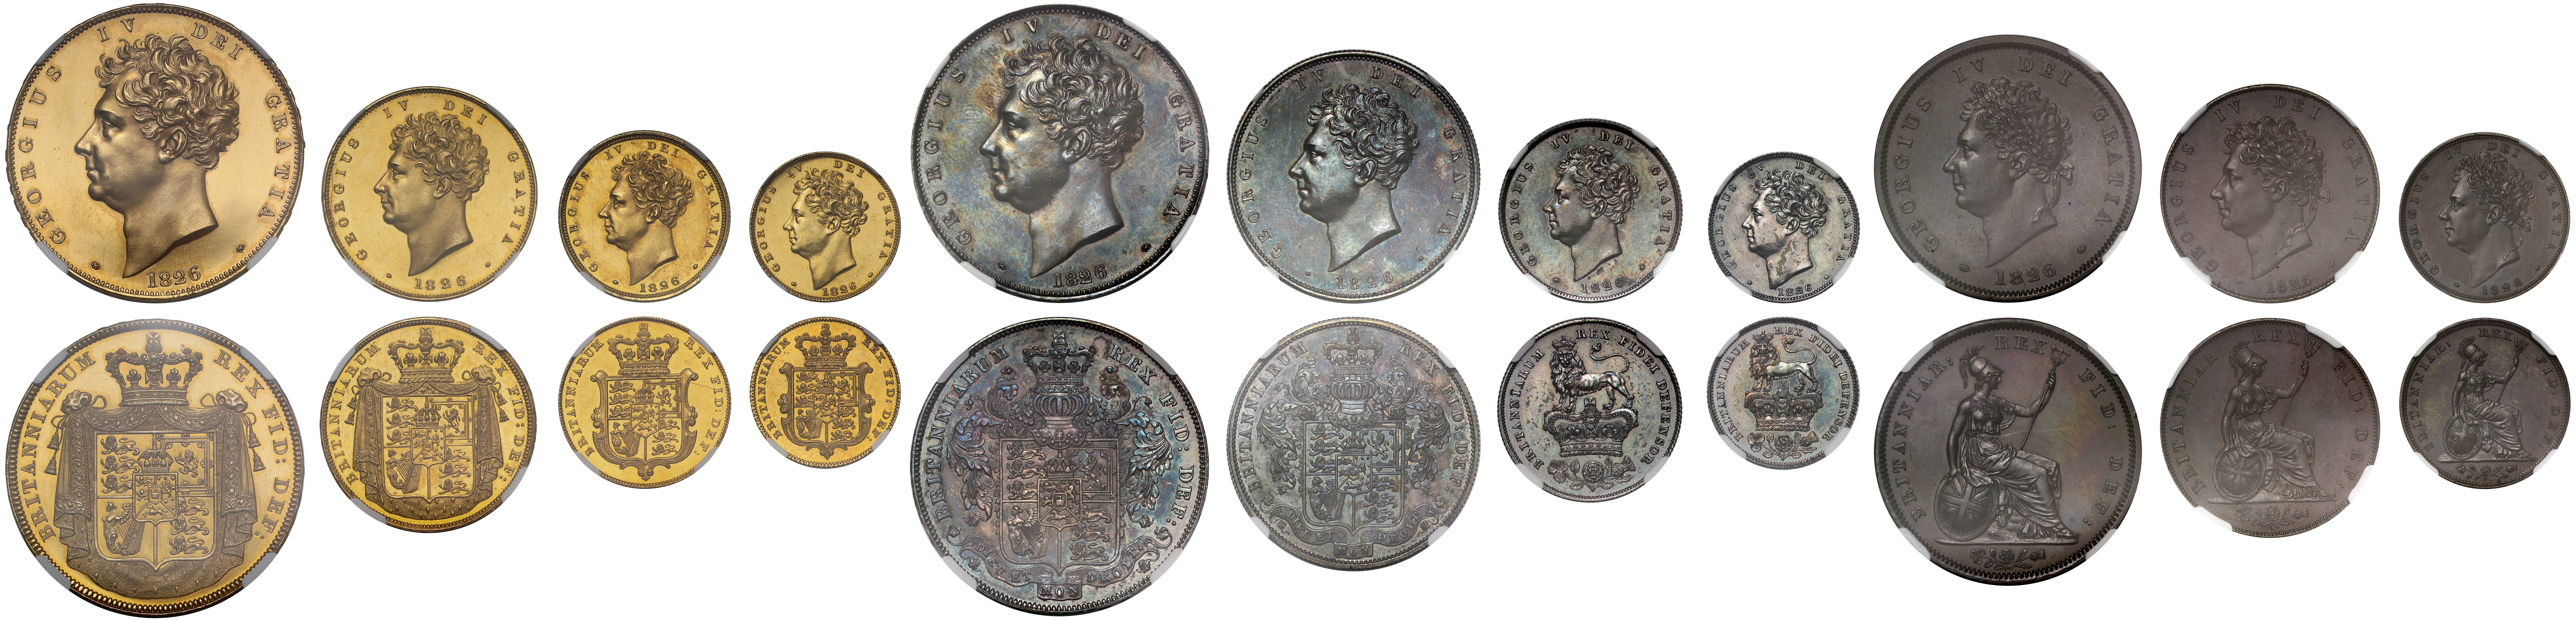 George IV (1820-30) Copper Penny, 1826